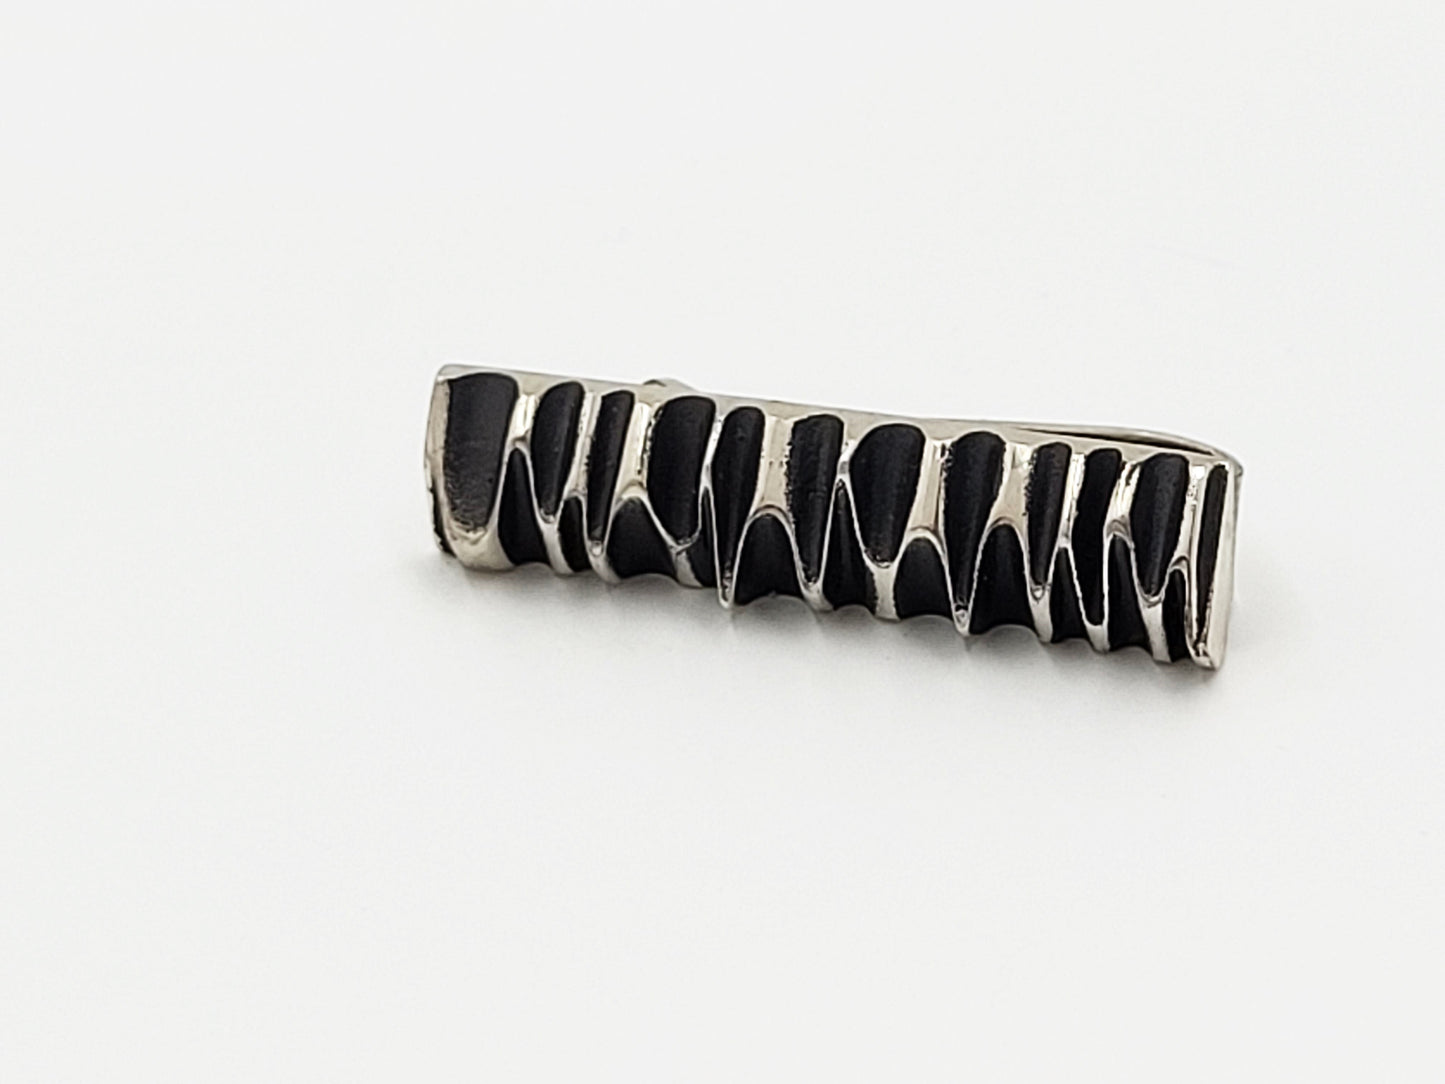 Harold Fithian Jewelry Superb Harold Fithian Sterling Abstract Brutalist Money/Tie Clip 1960s RARE